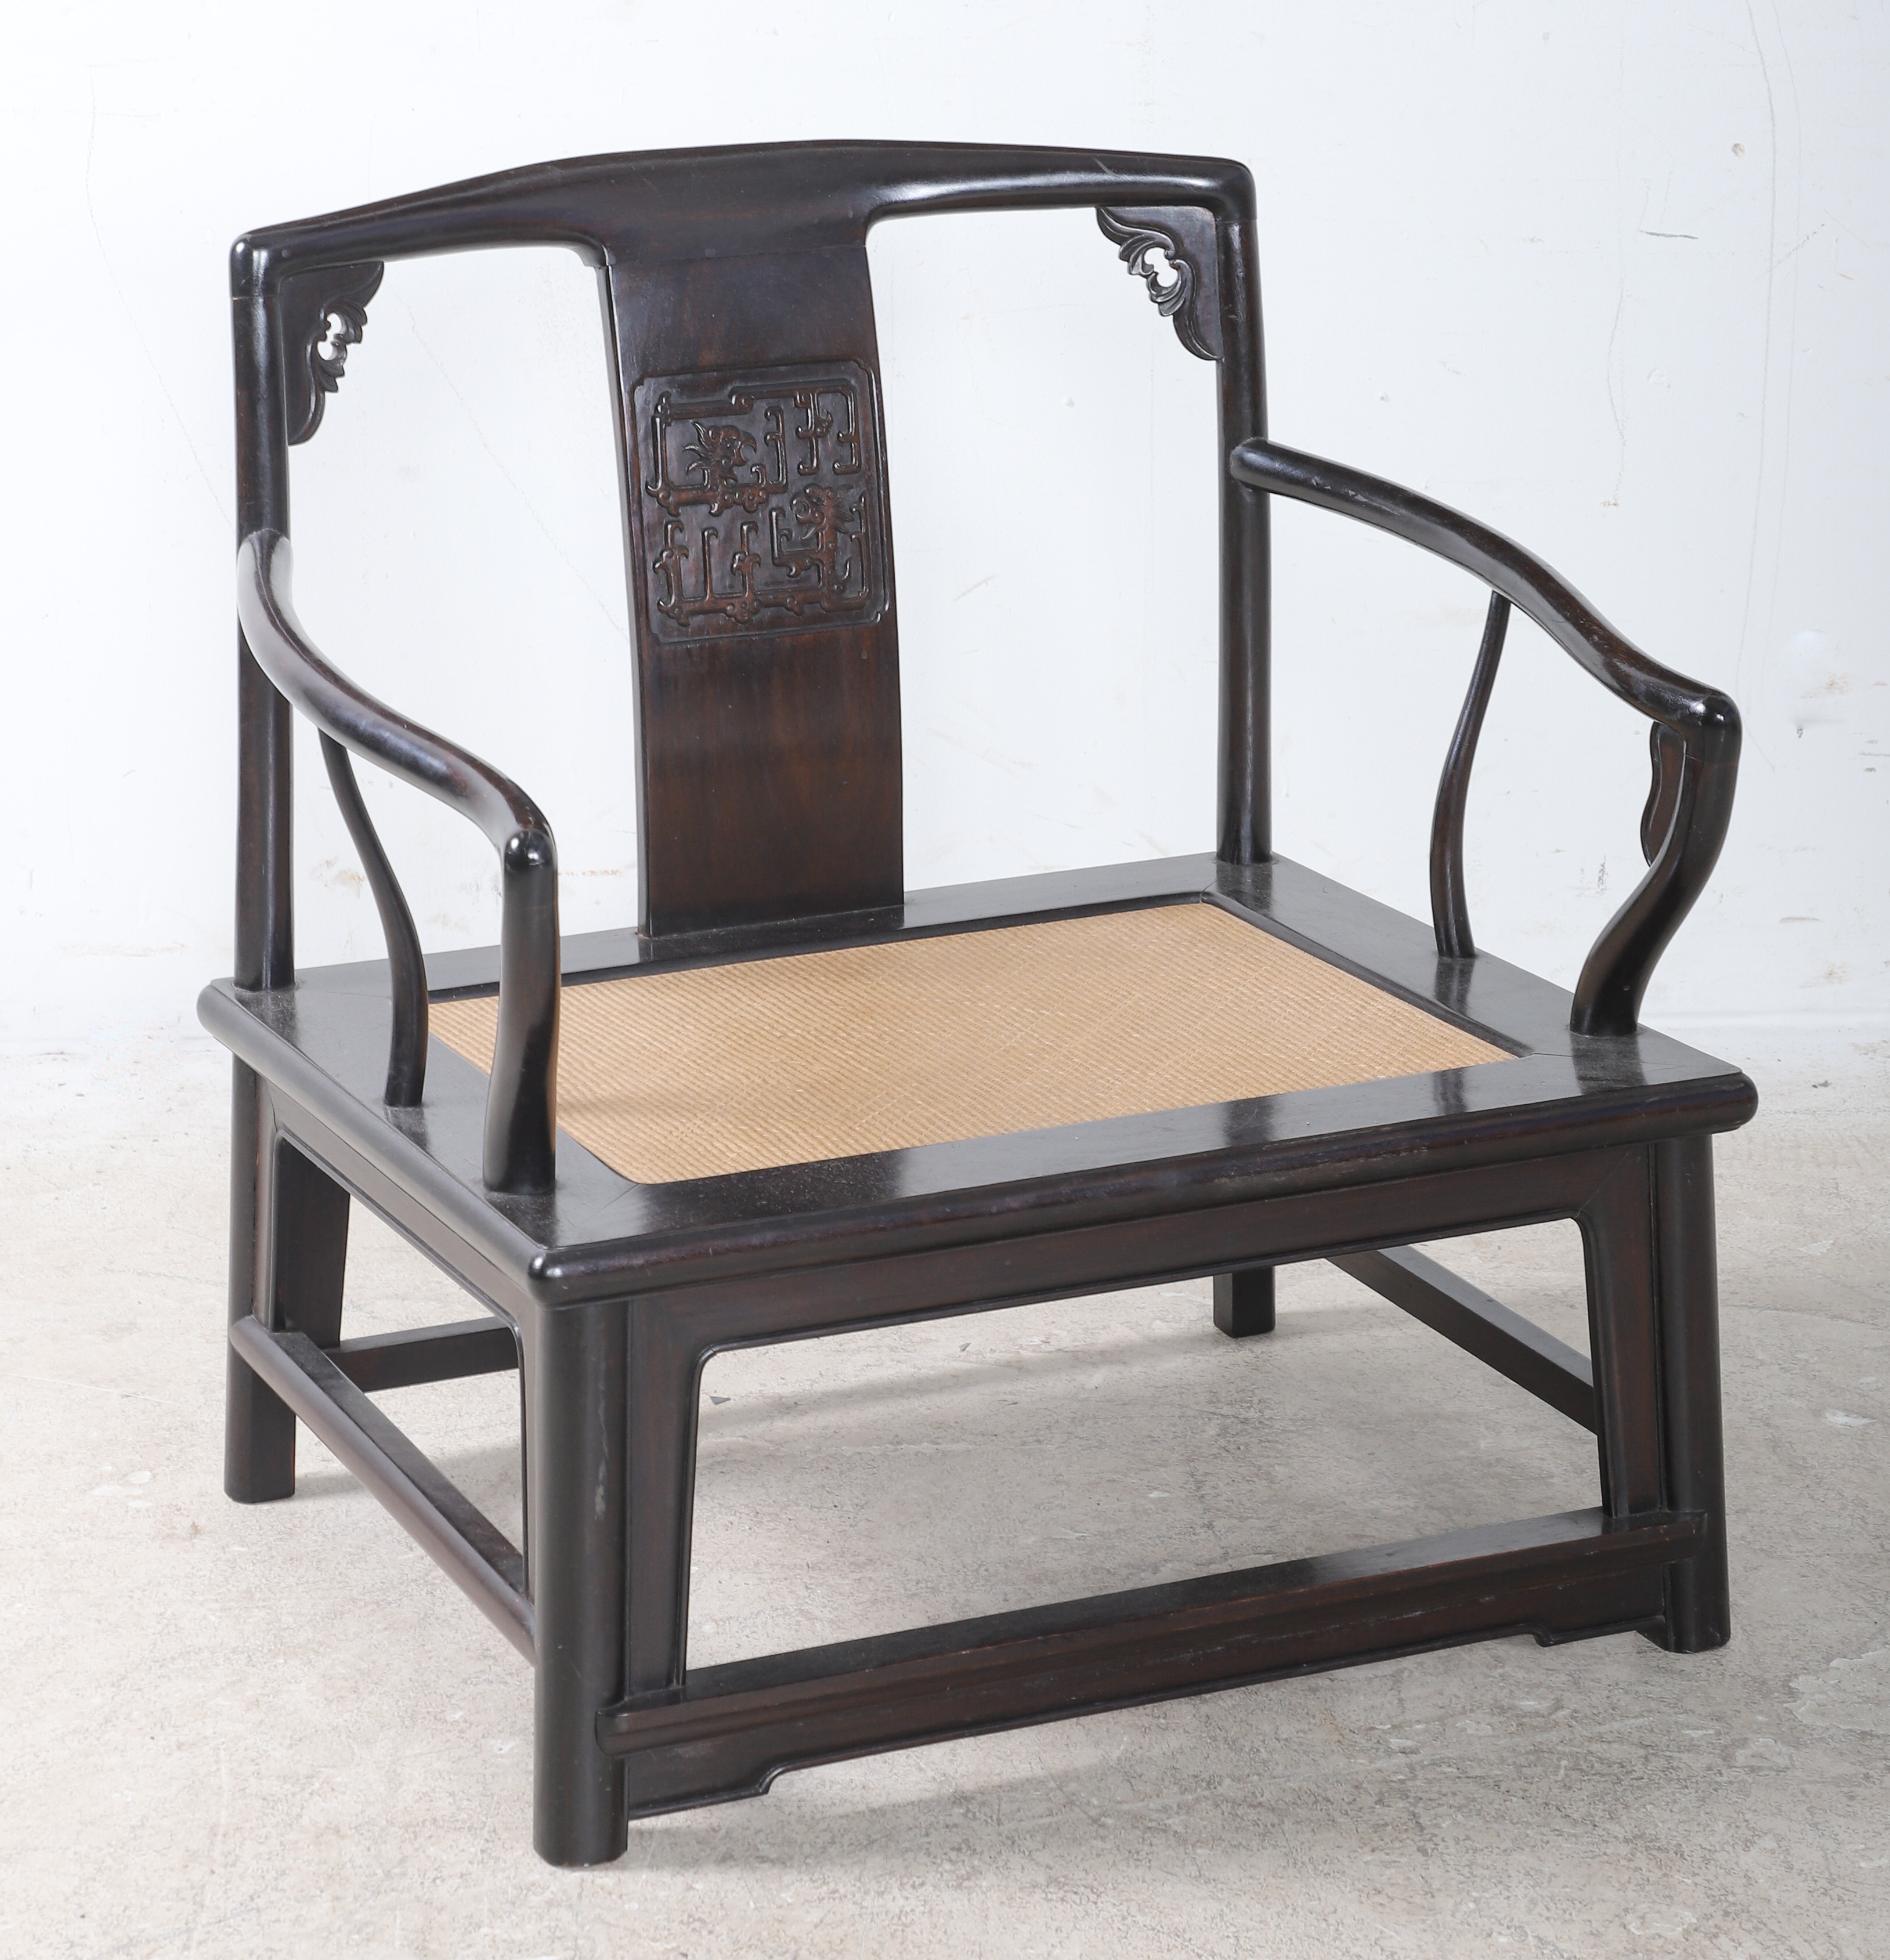 Chinese elmwood low chair, bentwood